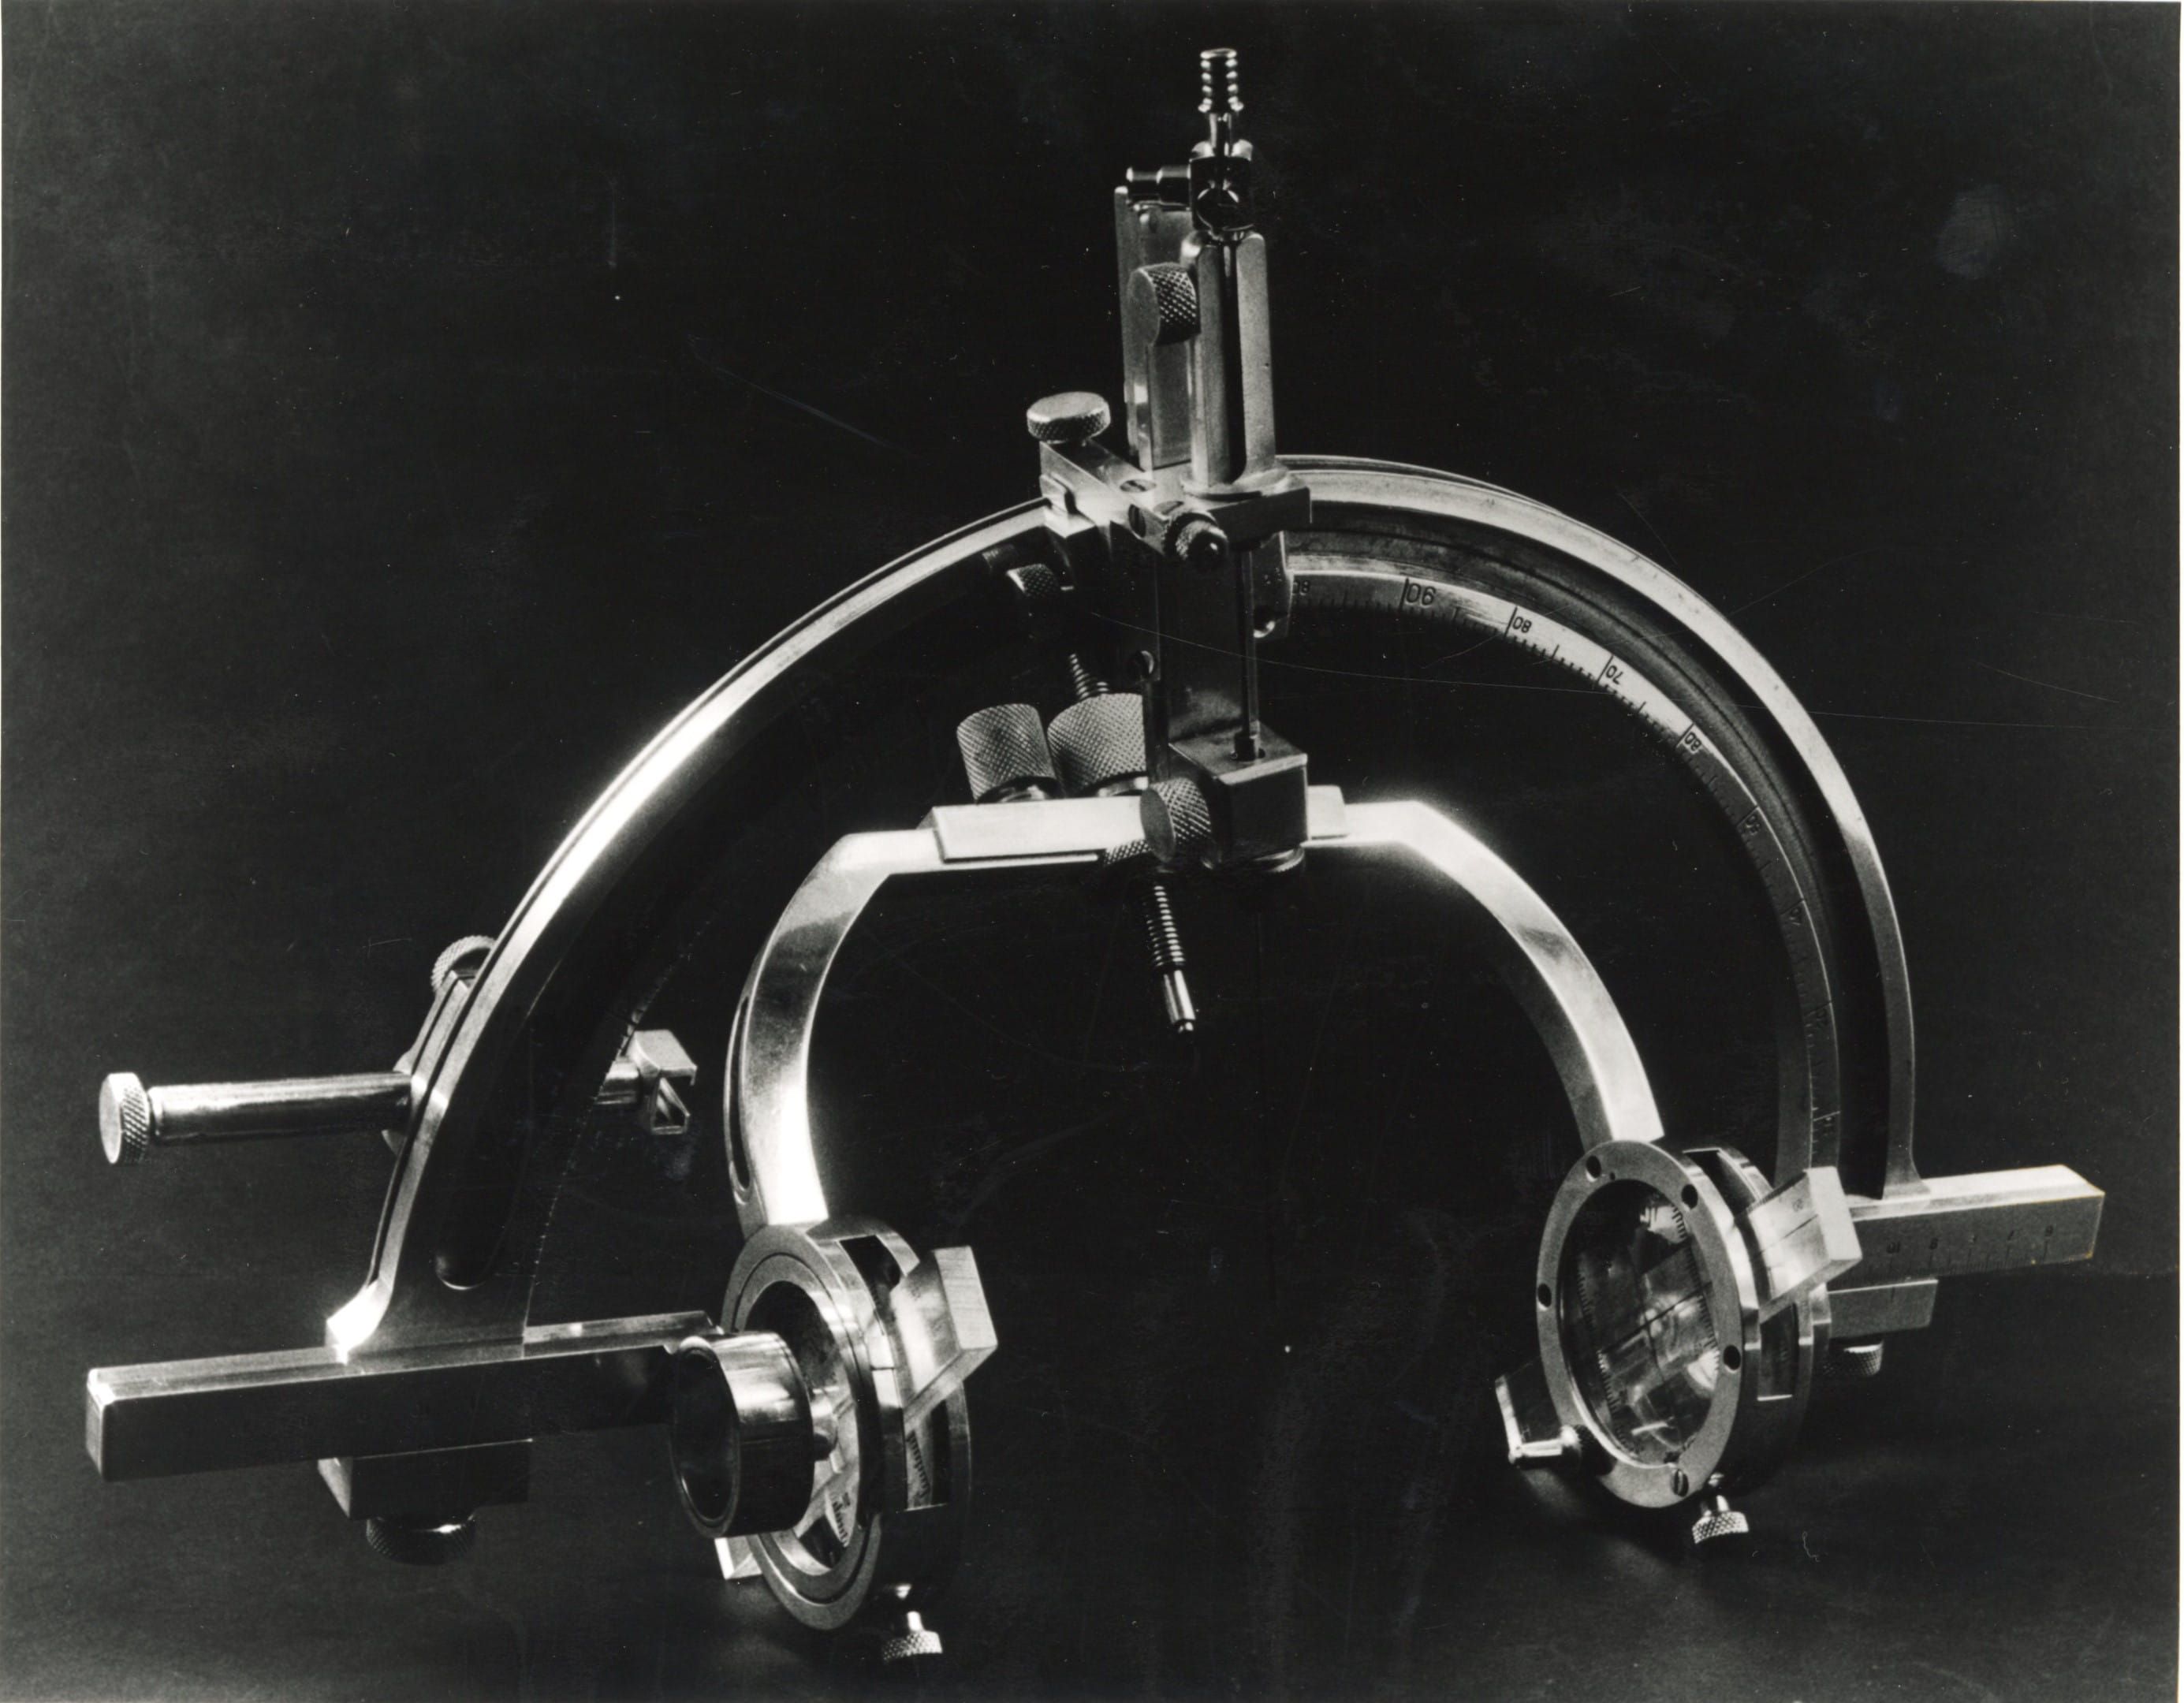 Leksell Stereotactic System 1949